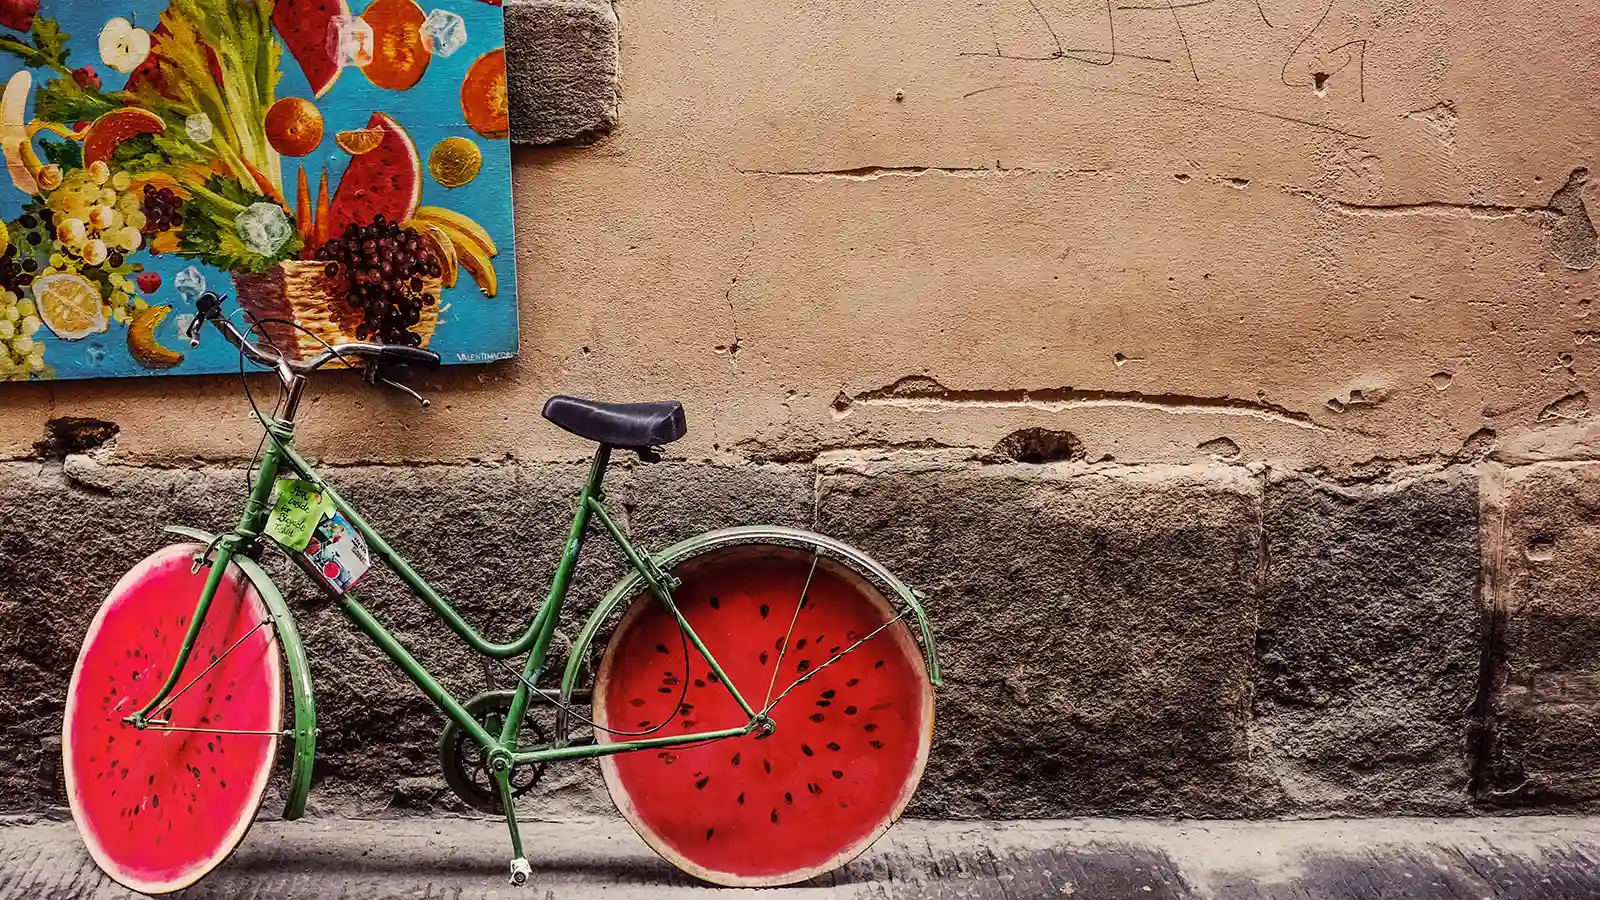 Model of a cycle that has its wheels made of watermelon